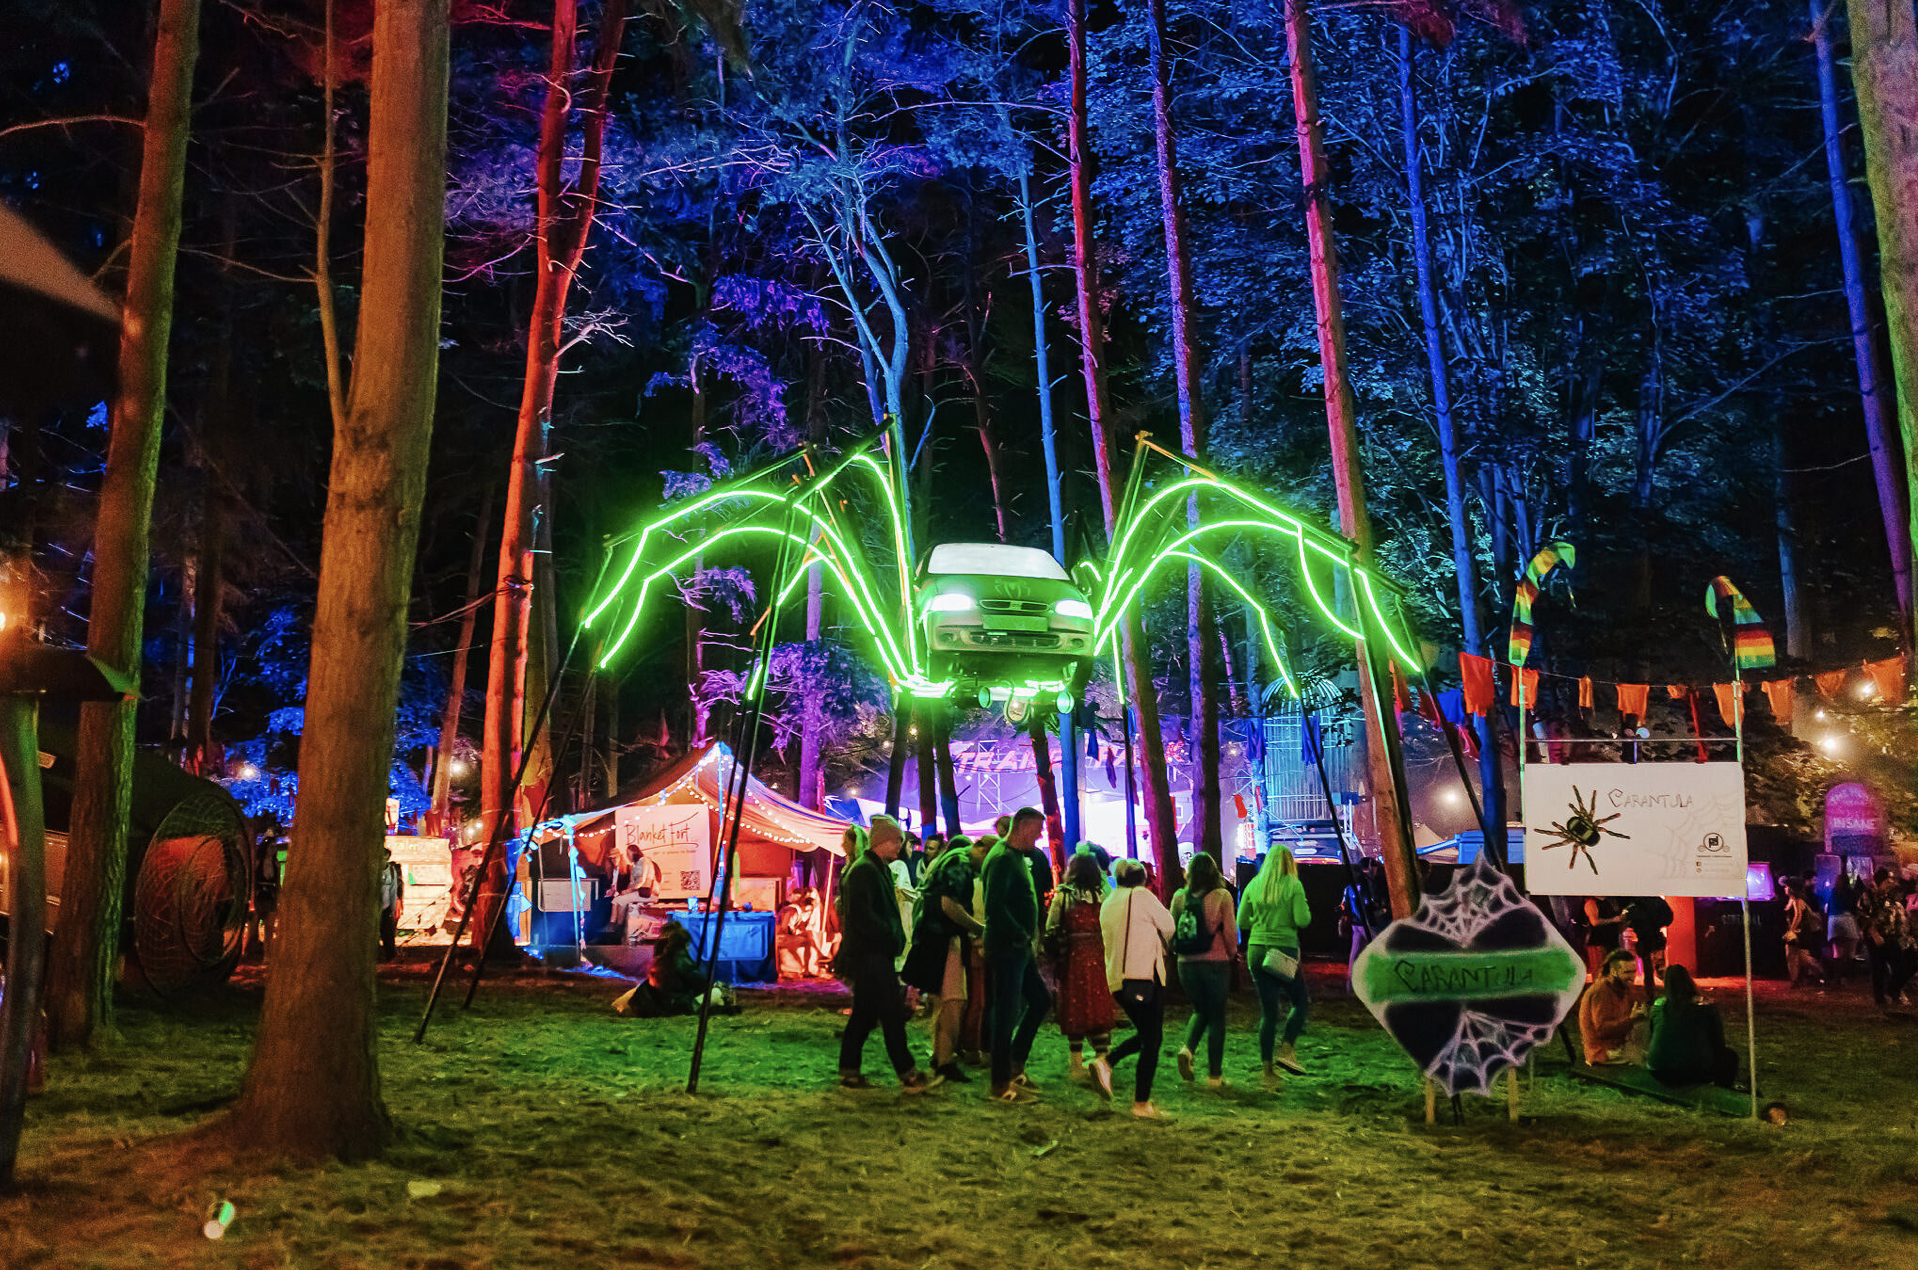 Latitude festival review: festivalgoers embark on Covid recovery together